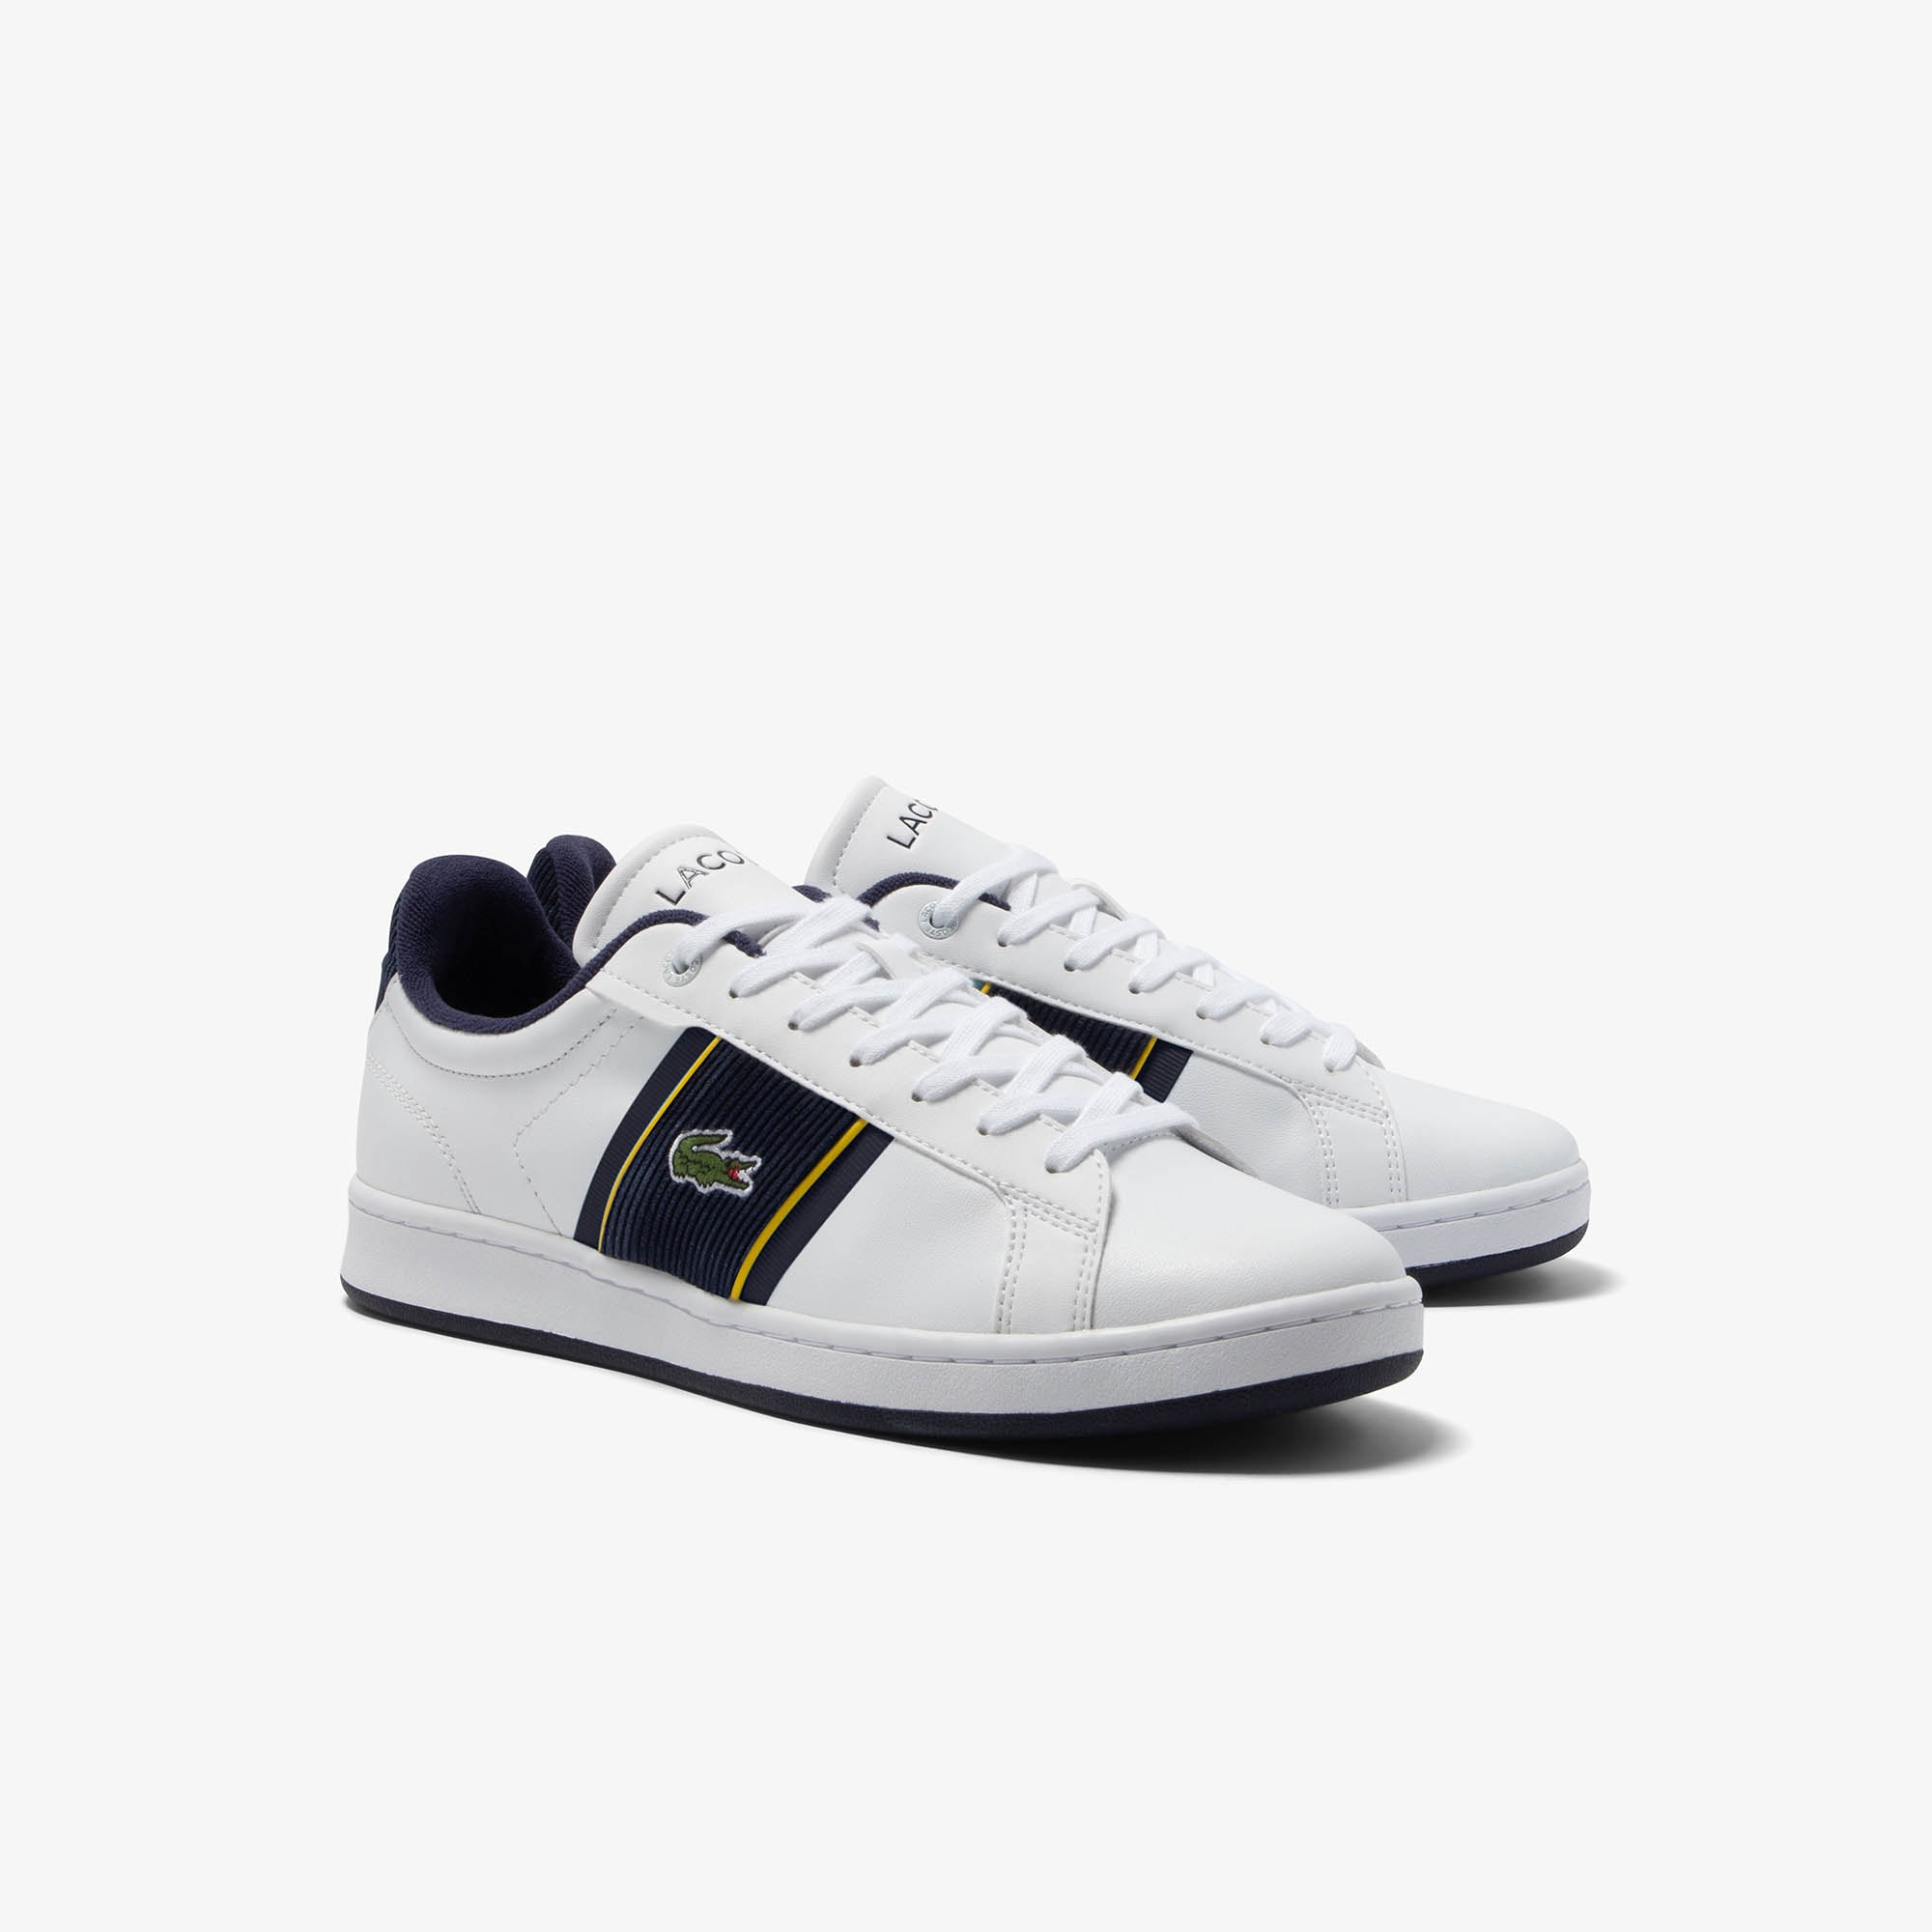 Lacoste Sneaker »CARNABY PRO CGR 2231 SMA«